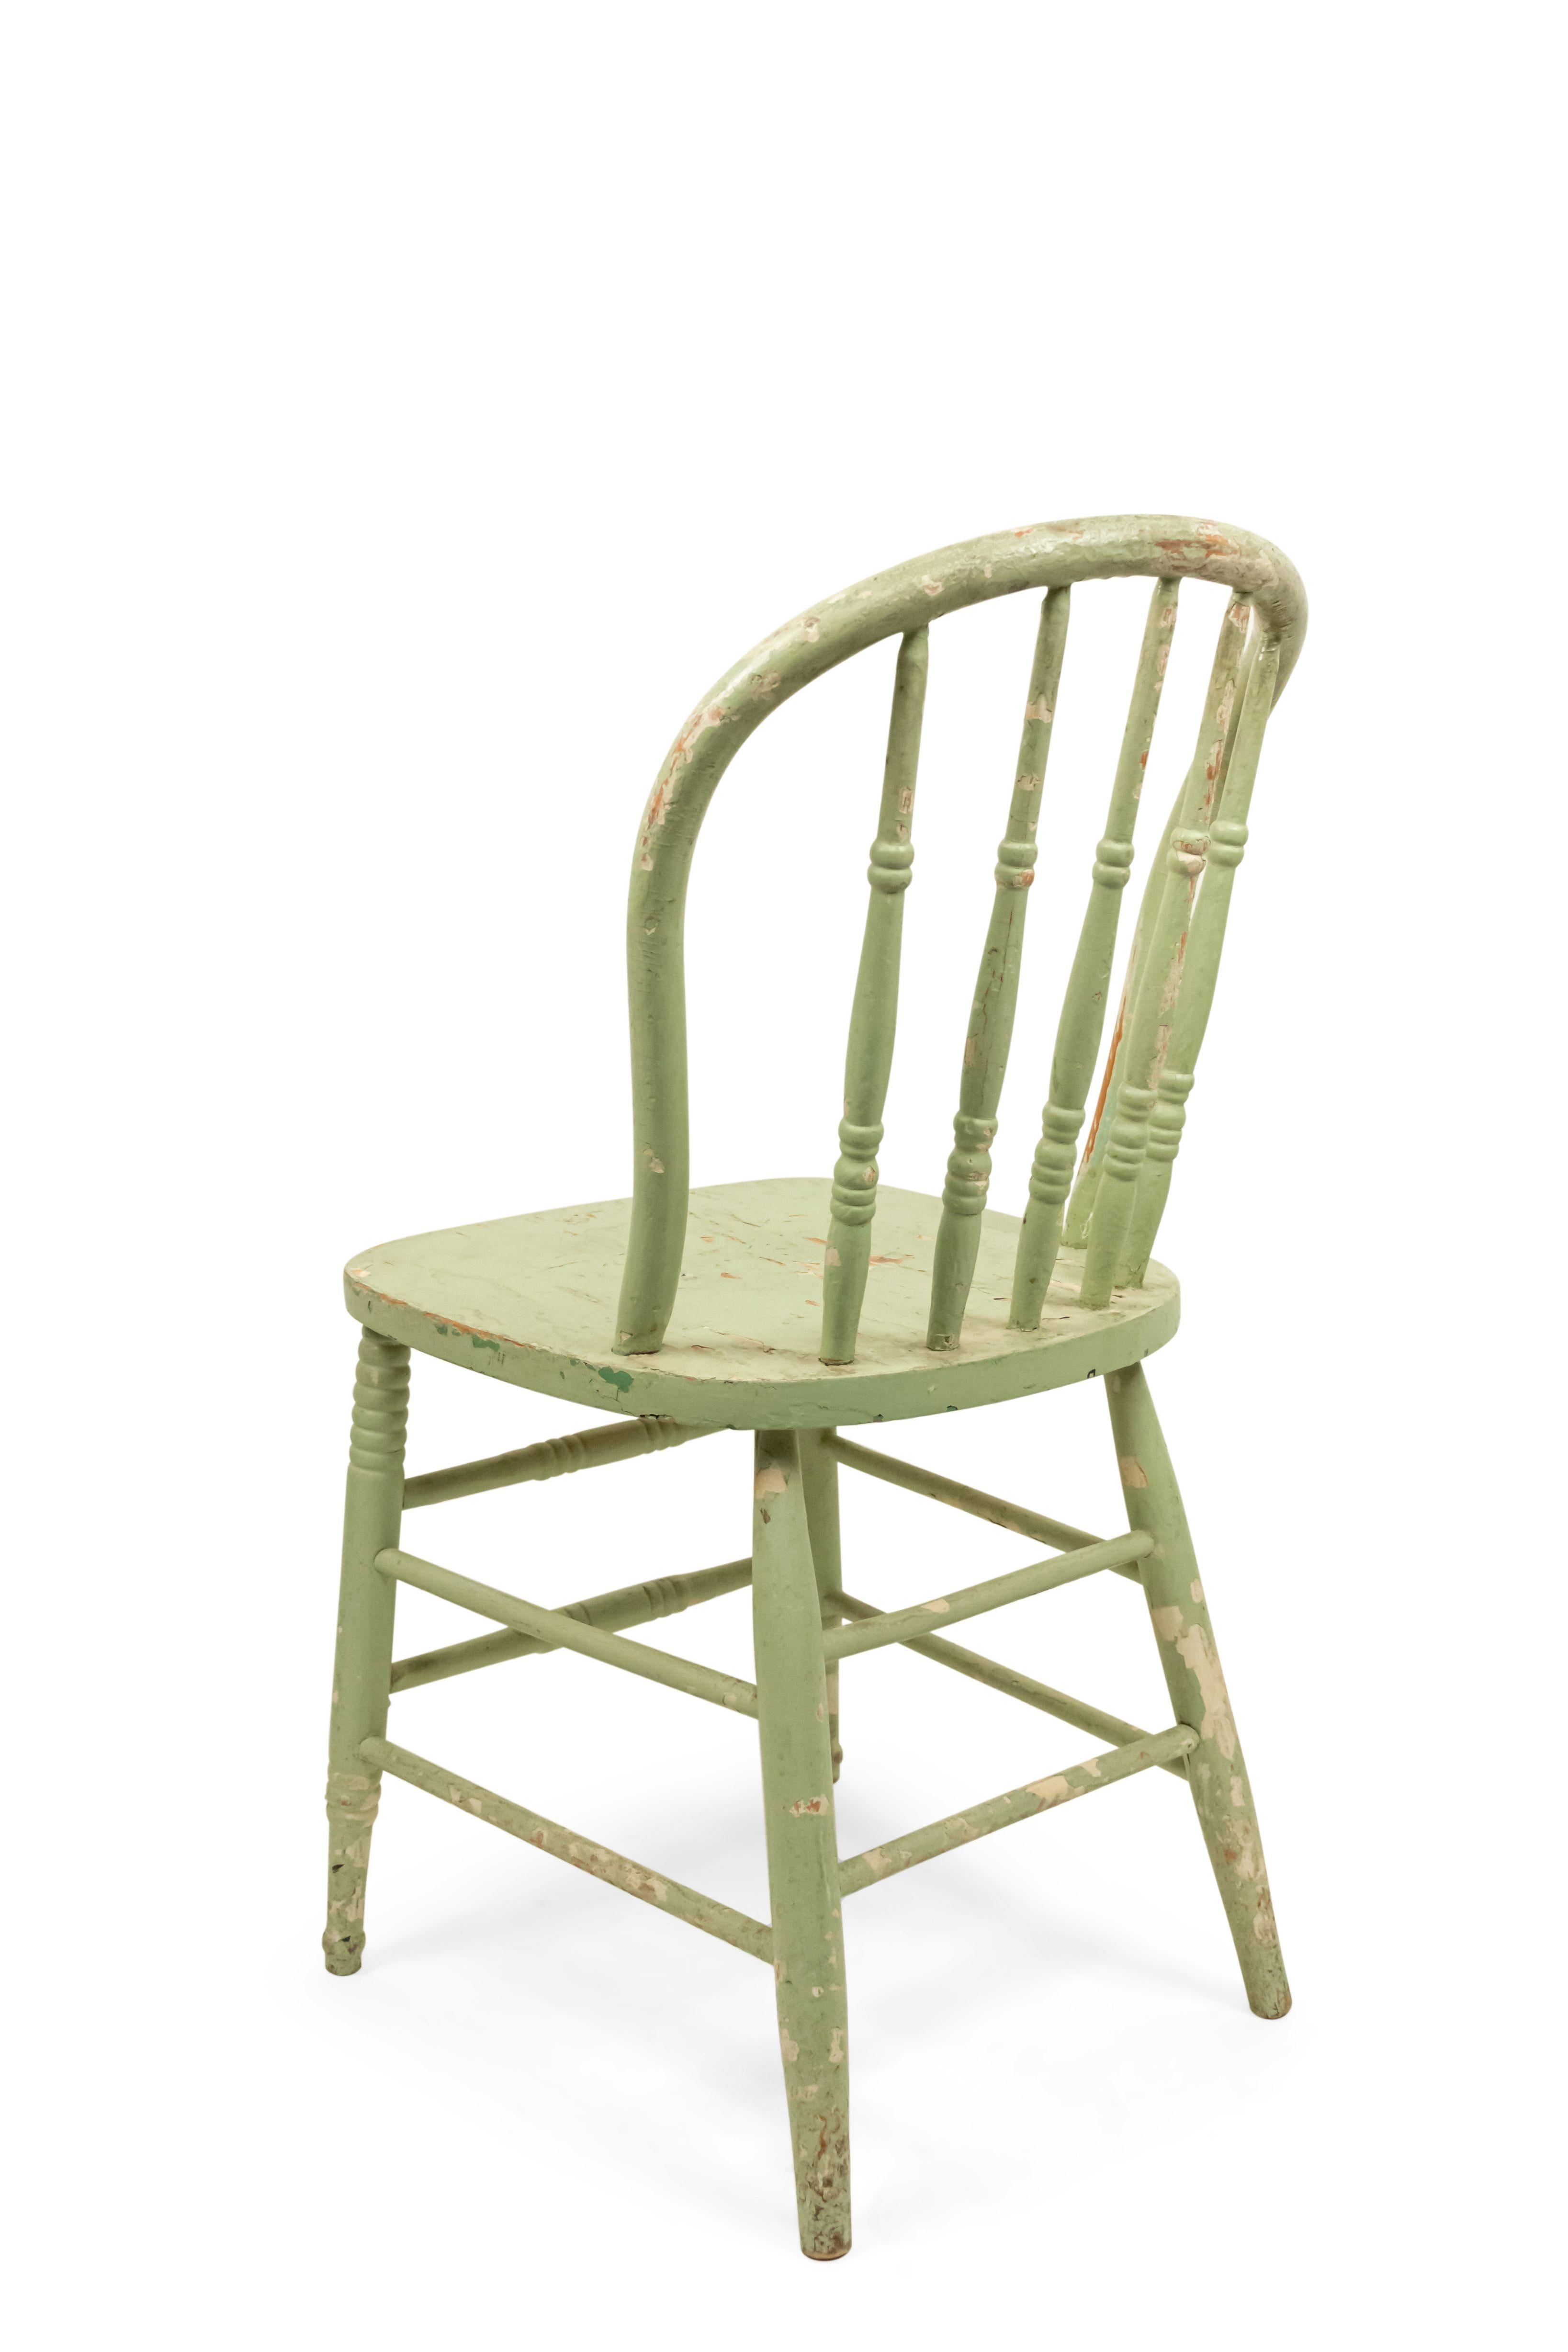 5 American Country Green Spindle Side Chairs For Sale 6